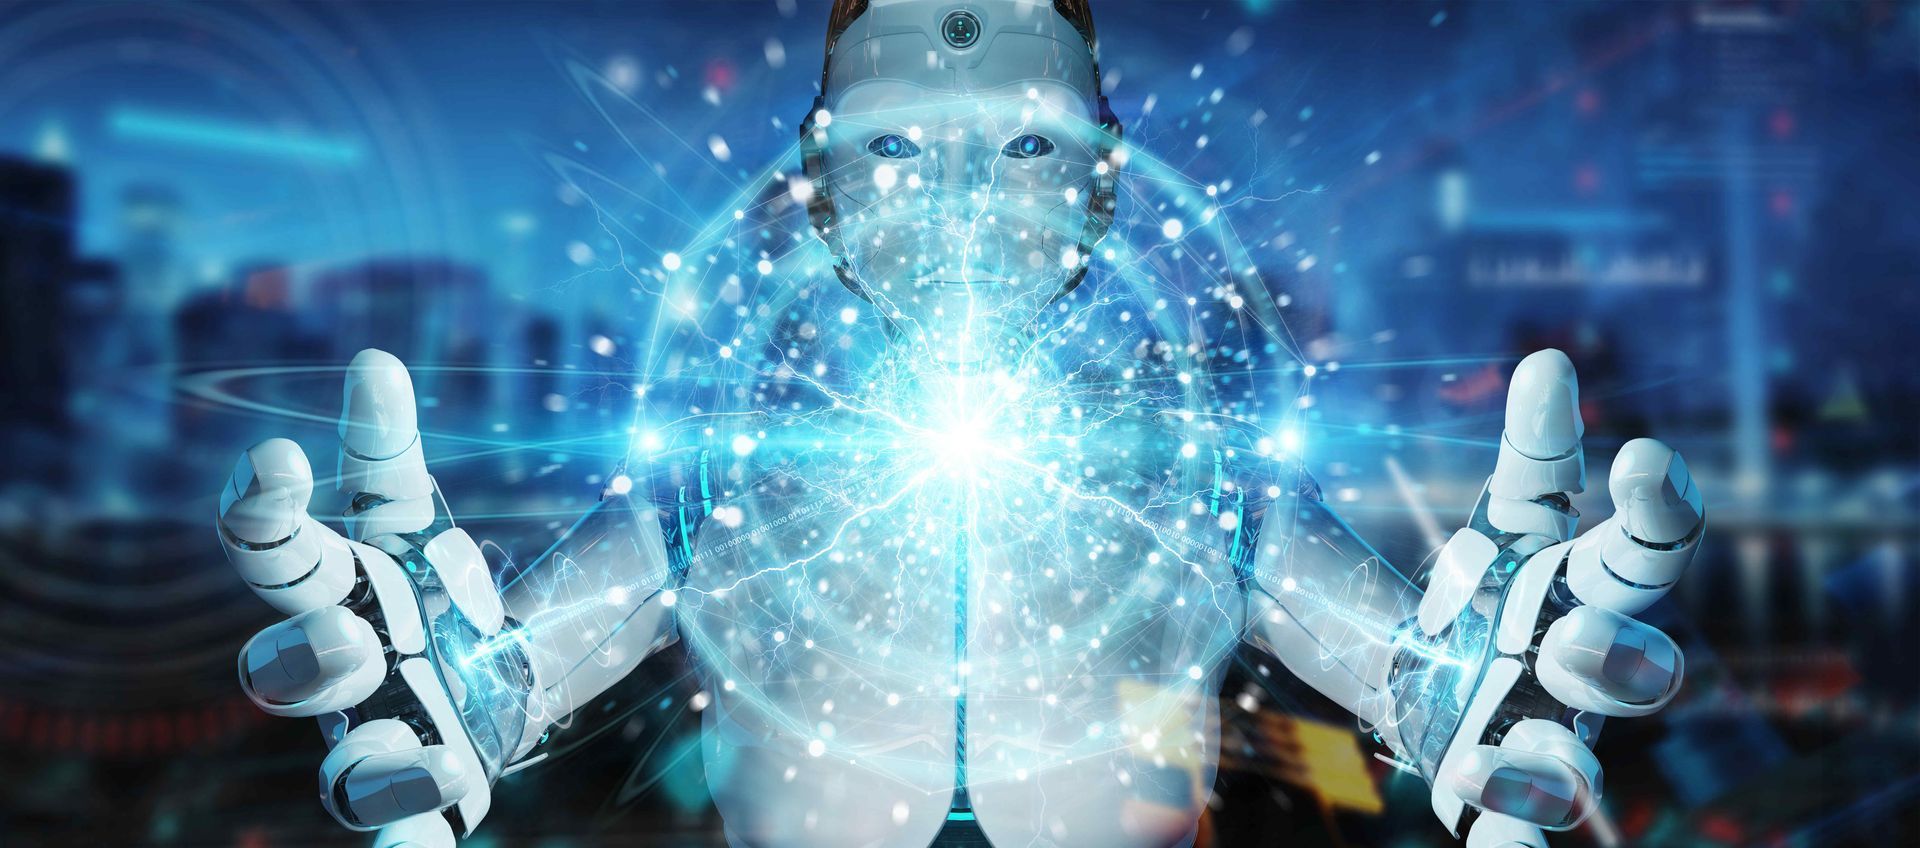 somewhat human-looking robot looking forward with his hands outstretched in front with what looks like a ball of blue and white energy between it's hands